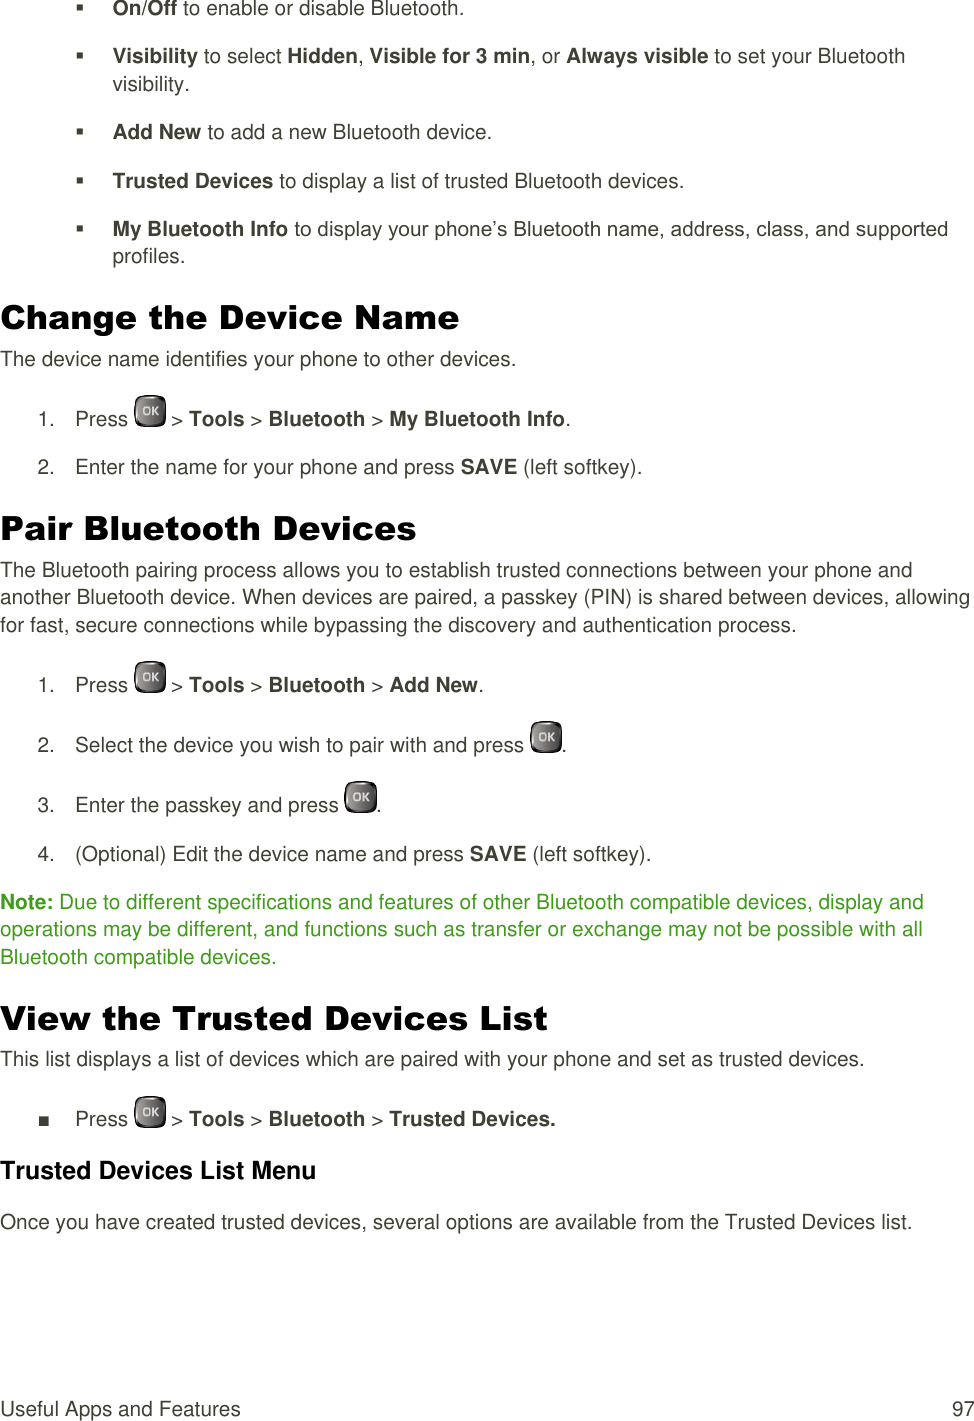  Useful Apps and Features  97  On/Off to enable or disable Bluetooth.  Visibility to select Hidden, Visible for 3 min, or Always visible to set your Bluetooth visibility.  Add New to add a new Bluetooth device.  Trusted Devices to display a list of trusted Bluetooth devices.  My Bluetooth Info to display your phone’s Bluetooth name, address, class, and supported profiles. Change the Device Name The device name identifies your phone to other devices. 1.  Press   &gt; Tools &gt; Bluetooth &gt; My Bluetooth Info. 2.  Enter the name for your phone and press SAVE (left softkey). Pair Bluetooth Devices The Bluetooth pairing process allows you to establish trusted connections between your phone and another Bluetooth device. When devices are paired, a passkey (PIN) is shared between devices, allowing for fast, secure connections while bypassing the discovery and authentication process. 1.  Press   &gt; Tools &gt; Bluetooth &gt; Add New. 2.  Select the device you wish to pair with and press  . 3.  Enter the passkey and press  . 4.  (Optional) Edit the device name and press SAVE (left softkey). Note: Due to different specifications and features of other Bluetooth compatible devices, display and operations may be different, and functions such as transfer or exchange may not be possible with all Bluetooth compatible devices. View the Trusted Devices List This list displays a list of devices which are paired with your phone and set as trusted devices. ■  Press   &gt; Tools &gt; Bluetooth &gt; Trusted Devices. Trusted Devices List Menu Once you have created trusted devices, several options are available from the Trusted Devices list. 